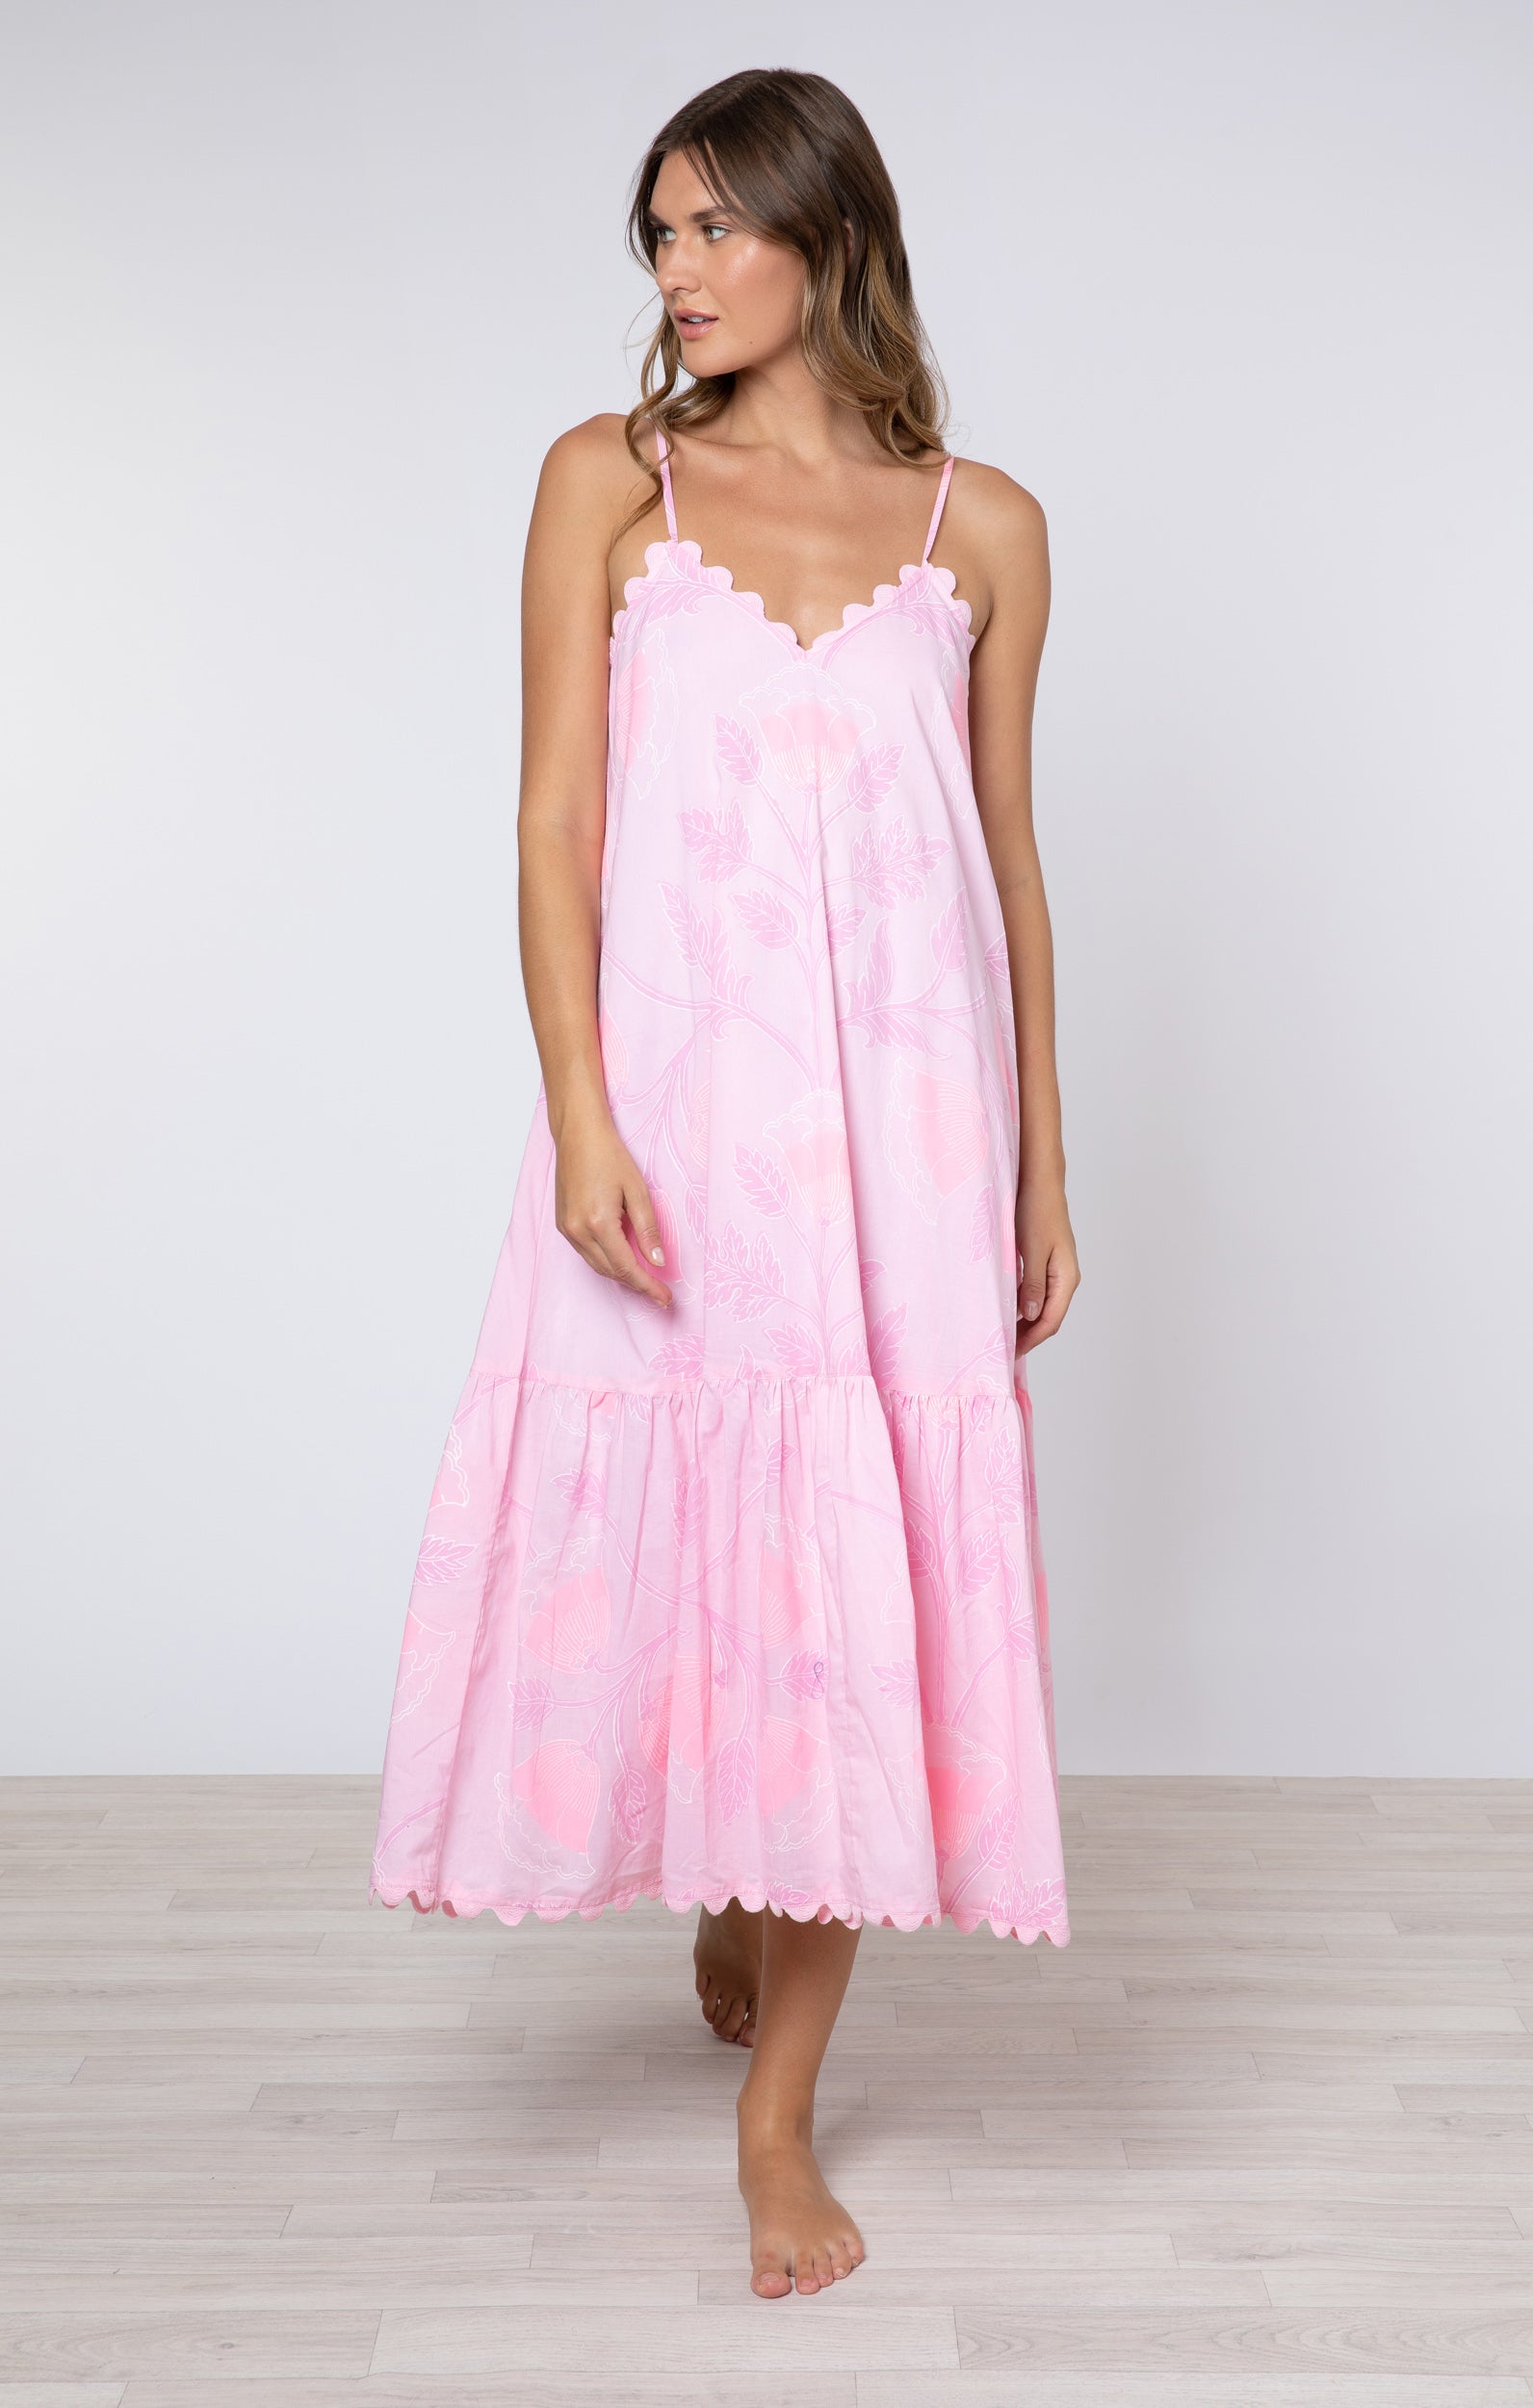 Need You More Candy Pink Babydoll Dress – Shop the Mint